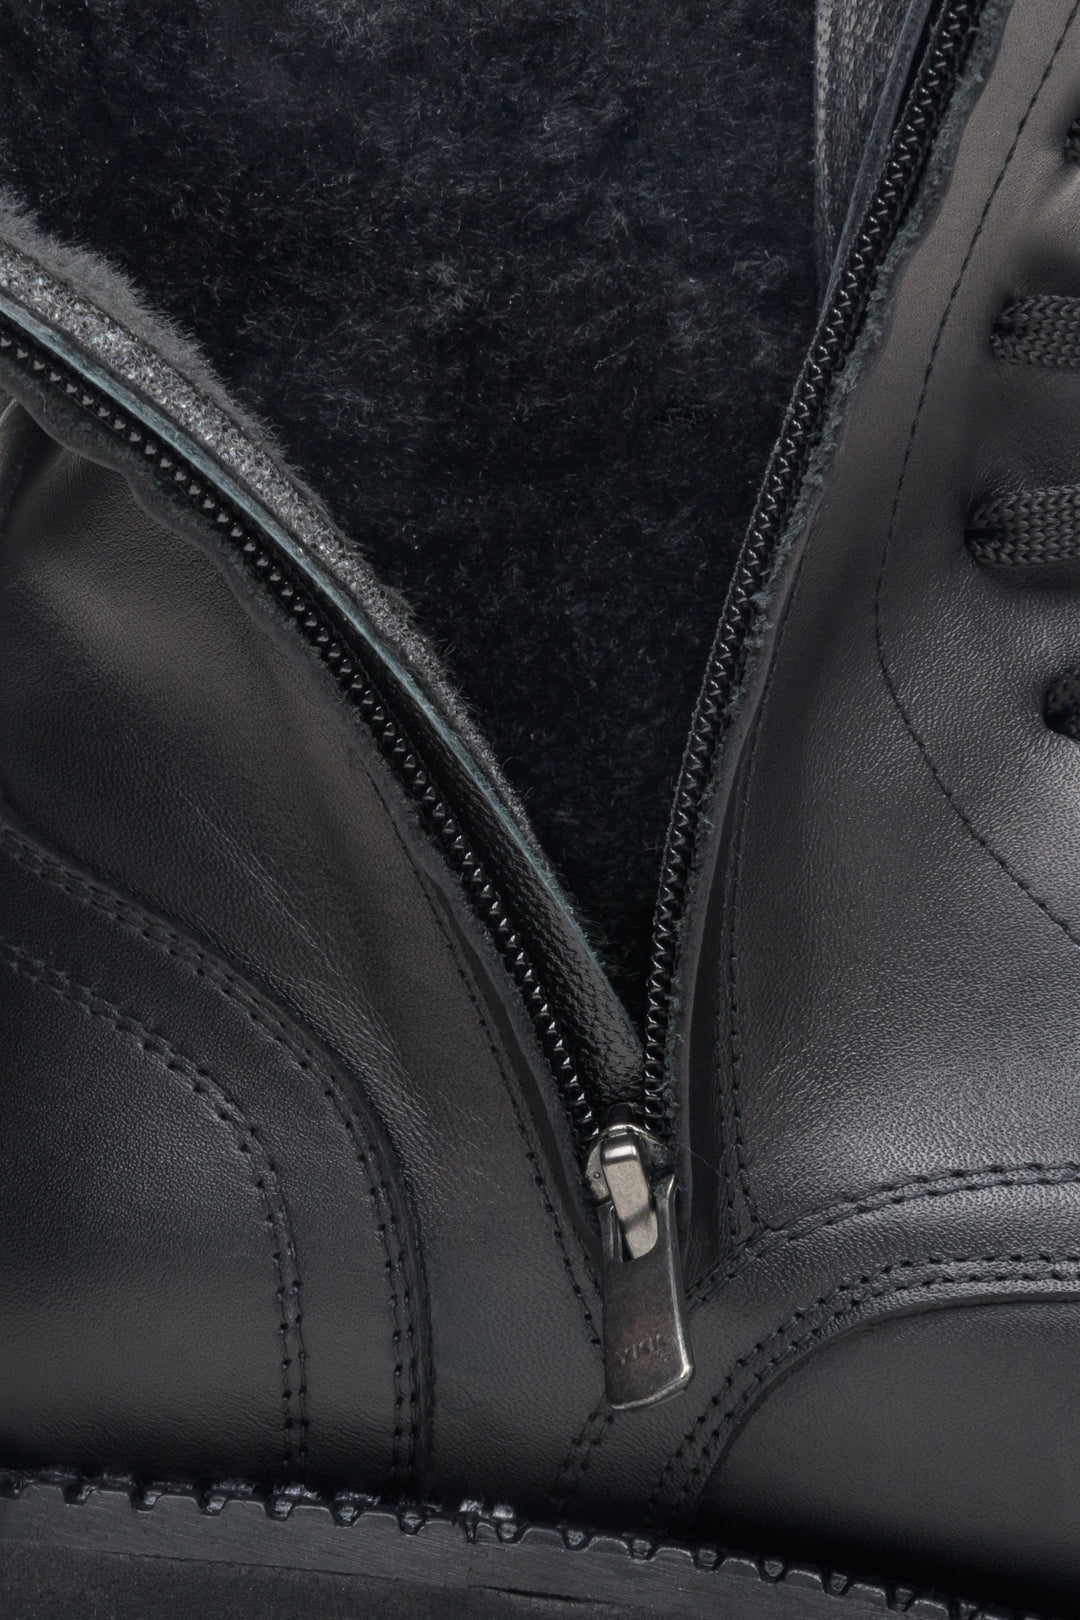 Women's boots with decorative lacing in black - close-up on the soft interior.